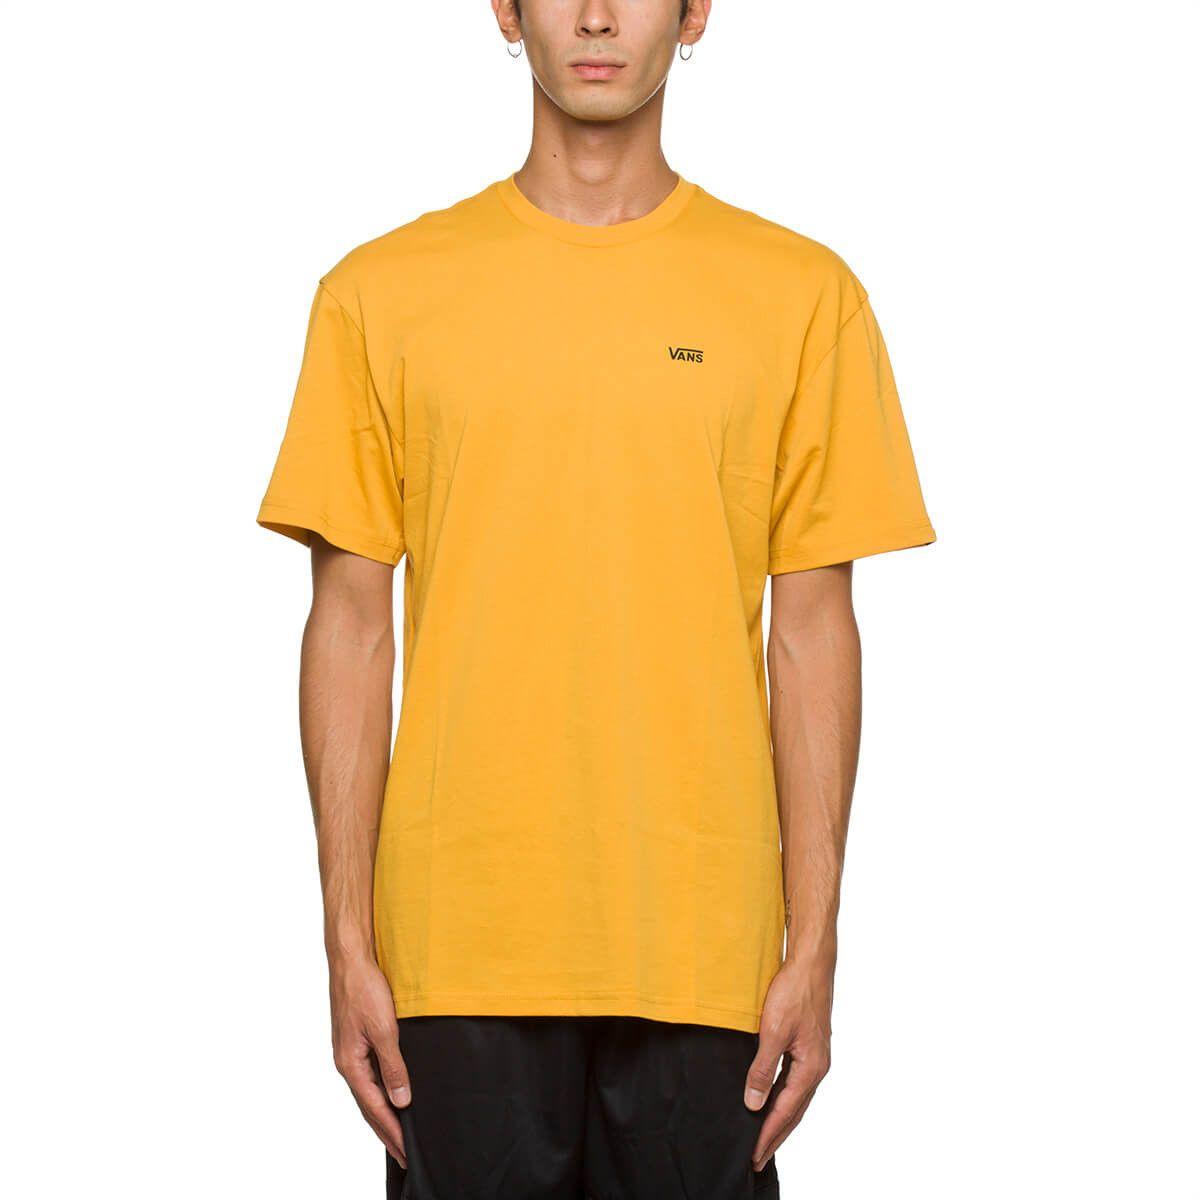 Yellow Vans Logo - Logo t-shirt from the F/W2017-18 Vans collection in ochre